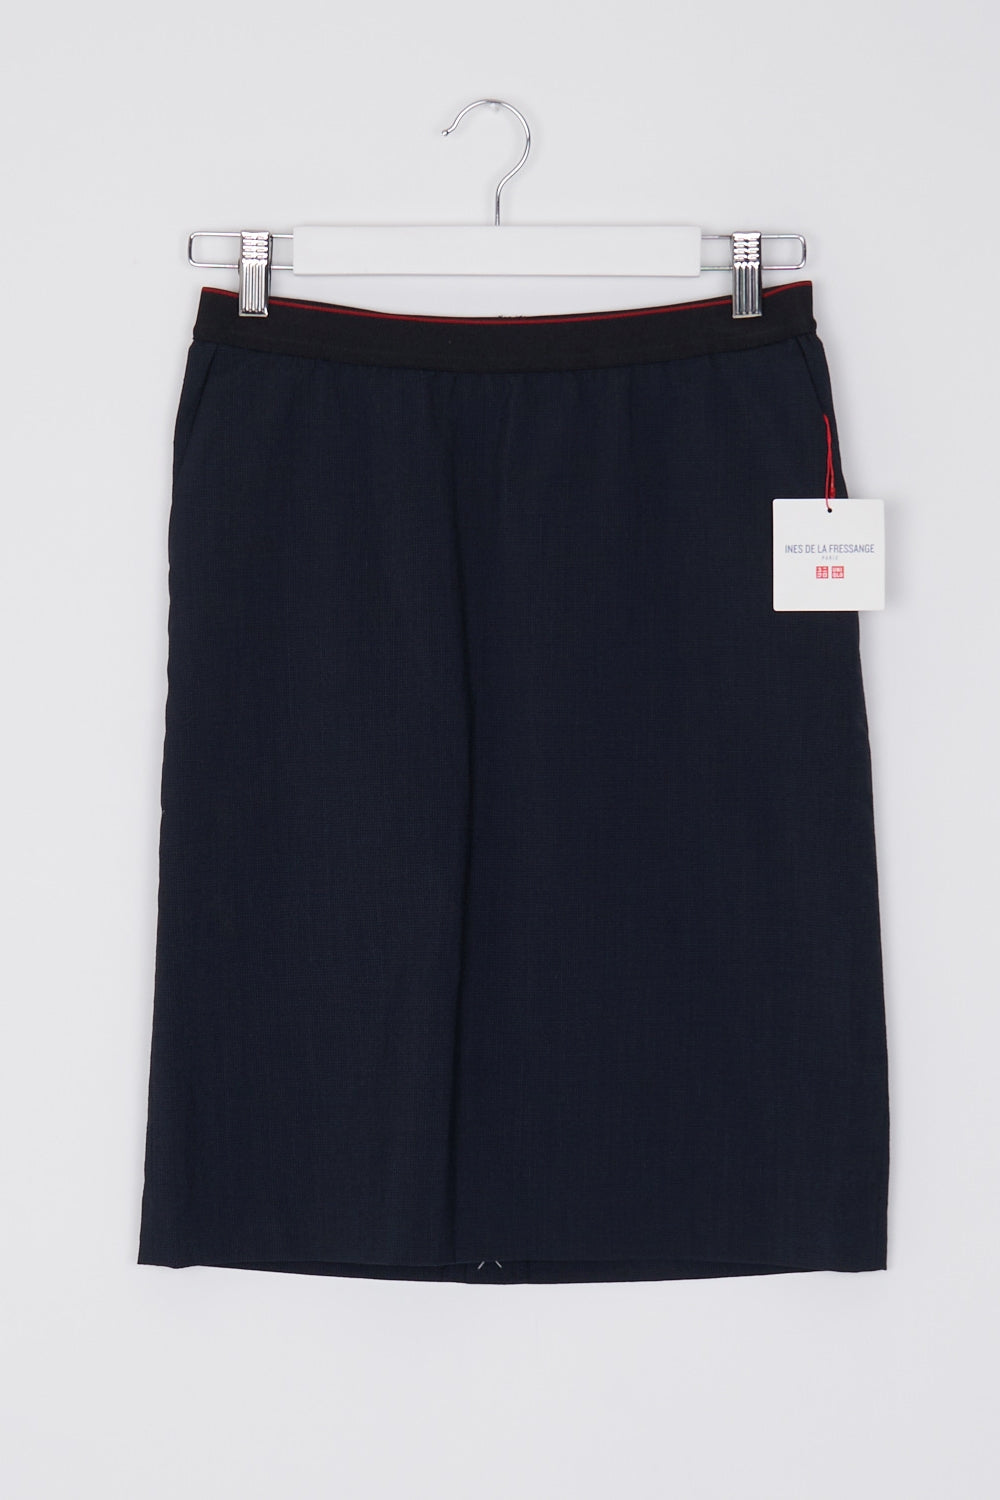 Uniqlo Navy Wool Blended Tight Fit Skirt S